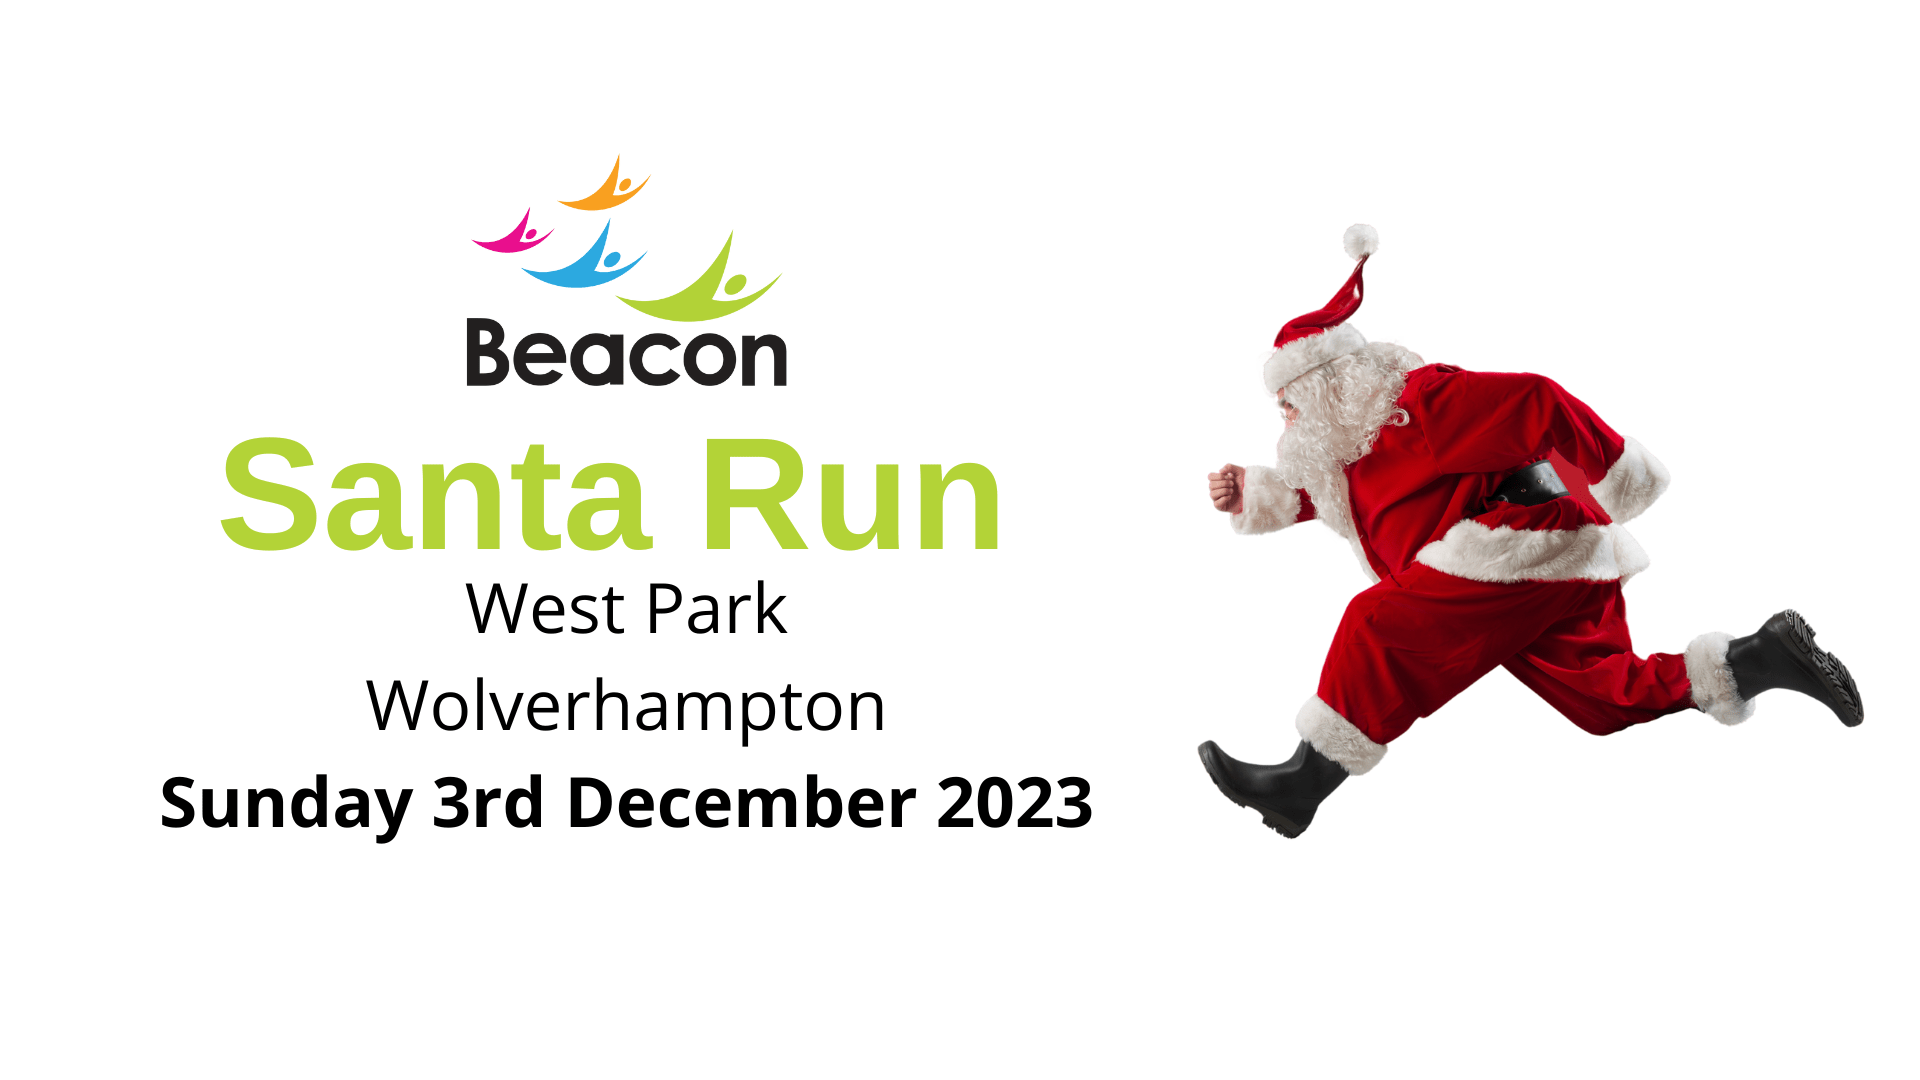 This graphic shows a running Santa on the right. It has the Beacon logo and details of our Santa Run as in the text.